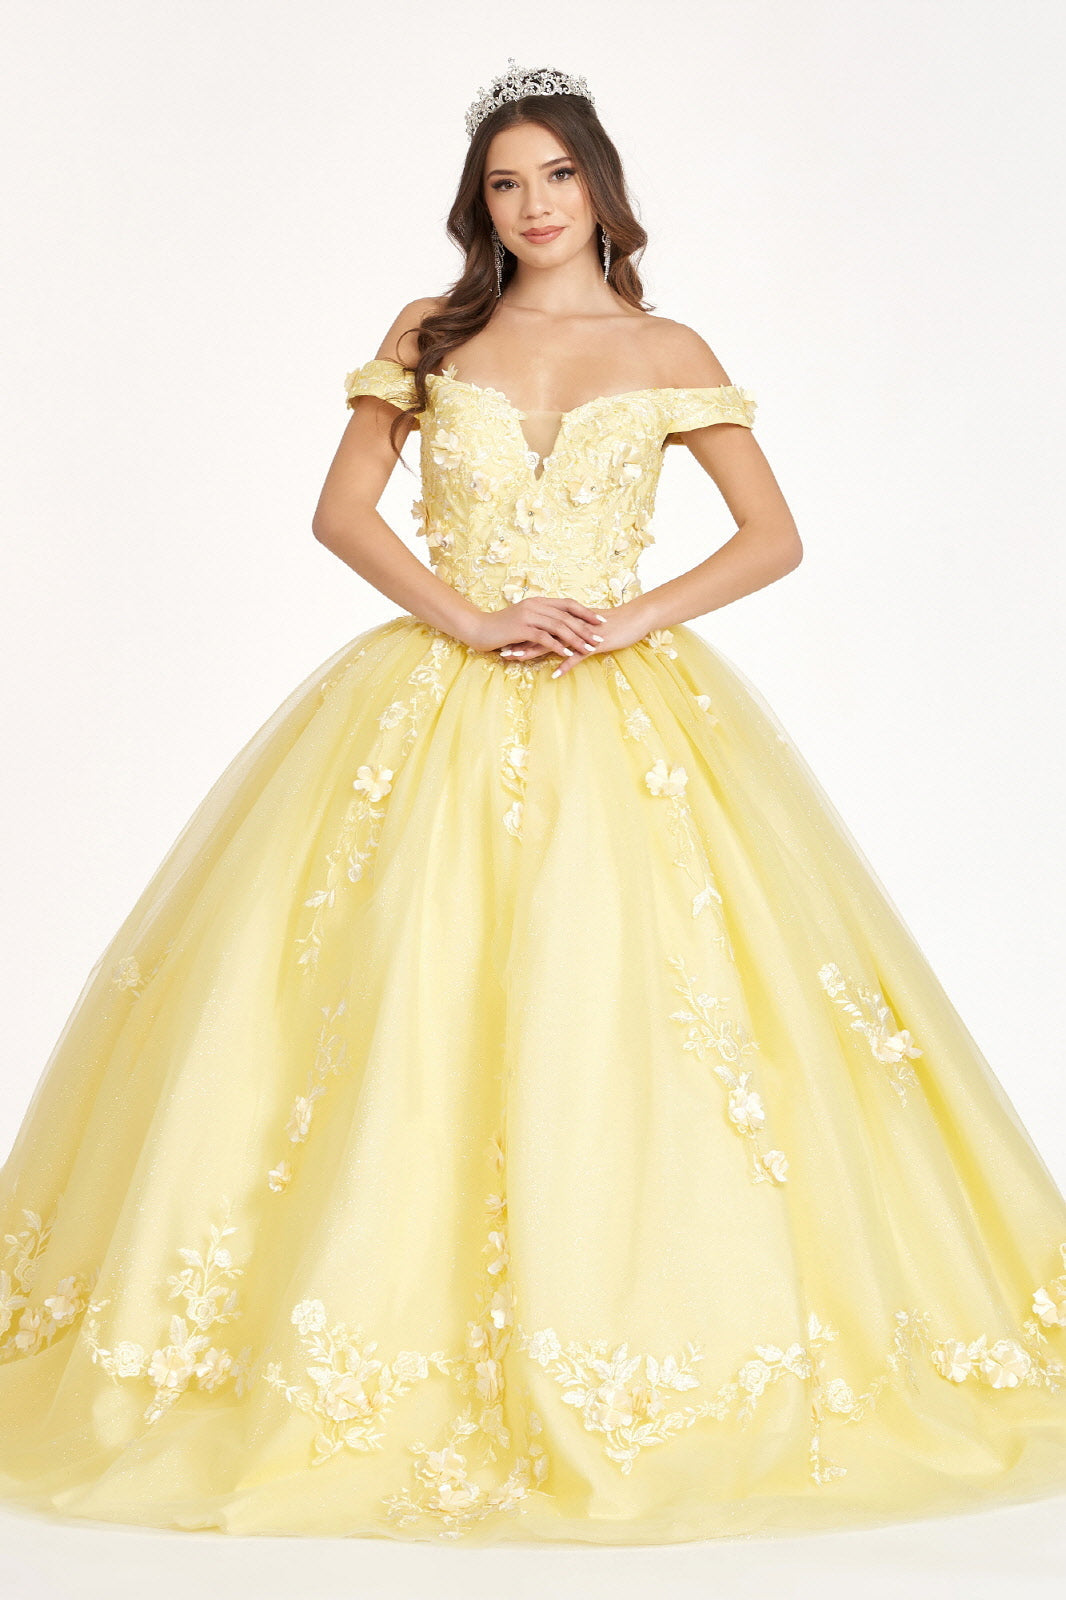 Embroidery Embellished Glitter-Mesh Cut-Away Shoulder Quinceanera Dress GLGL1958 Elsy Style QUINCEANERA